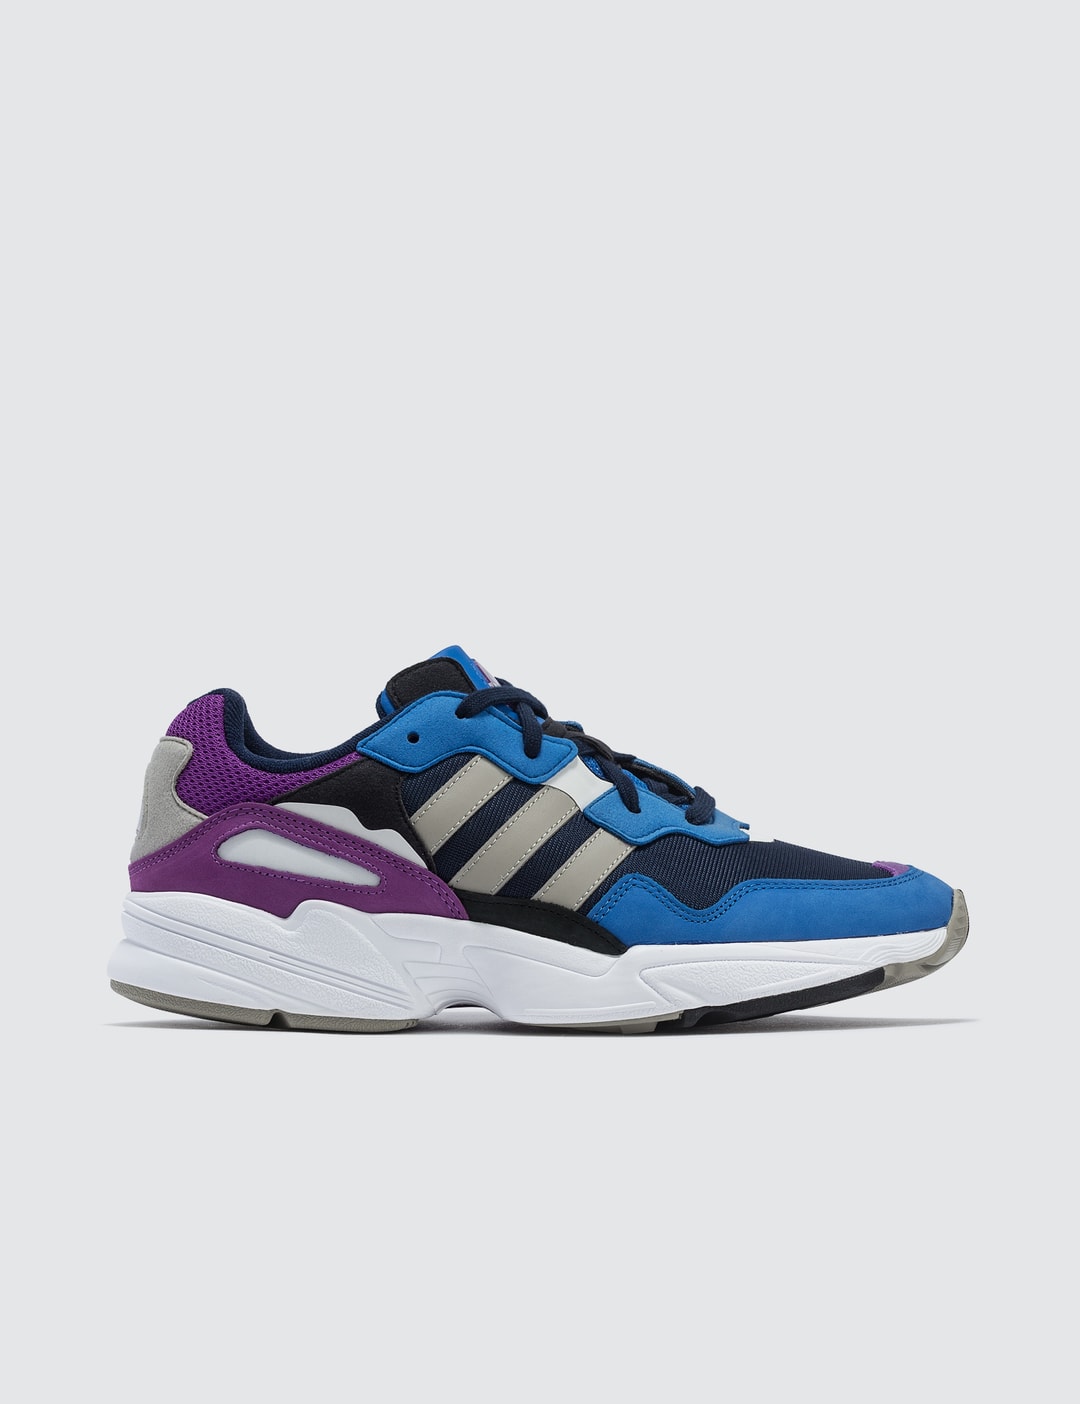 Adidas Originals - Yung-96 | - Globally Curated Fashion and Lifestyle by